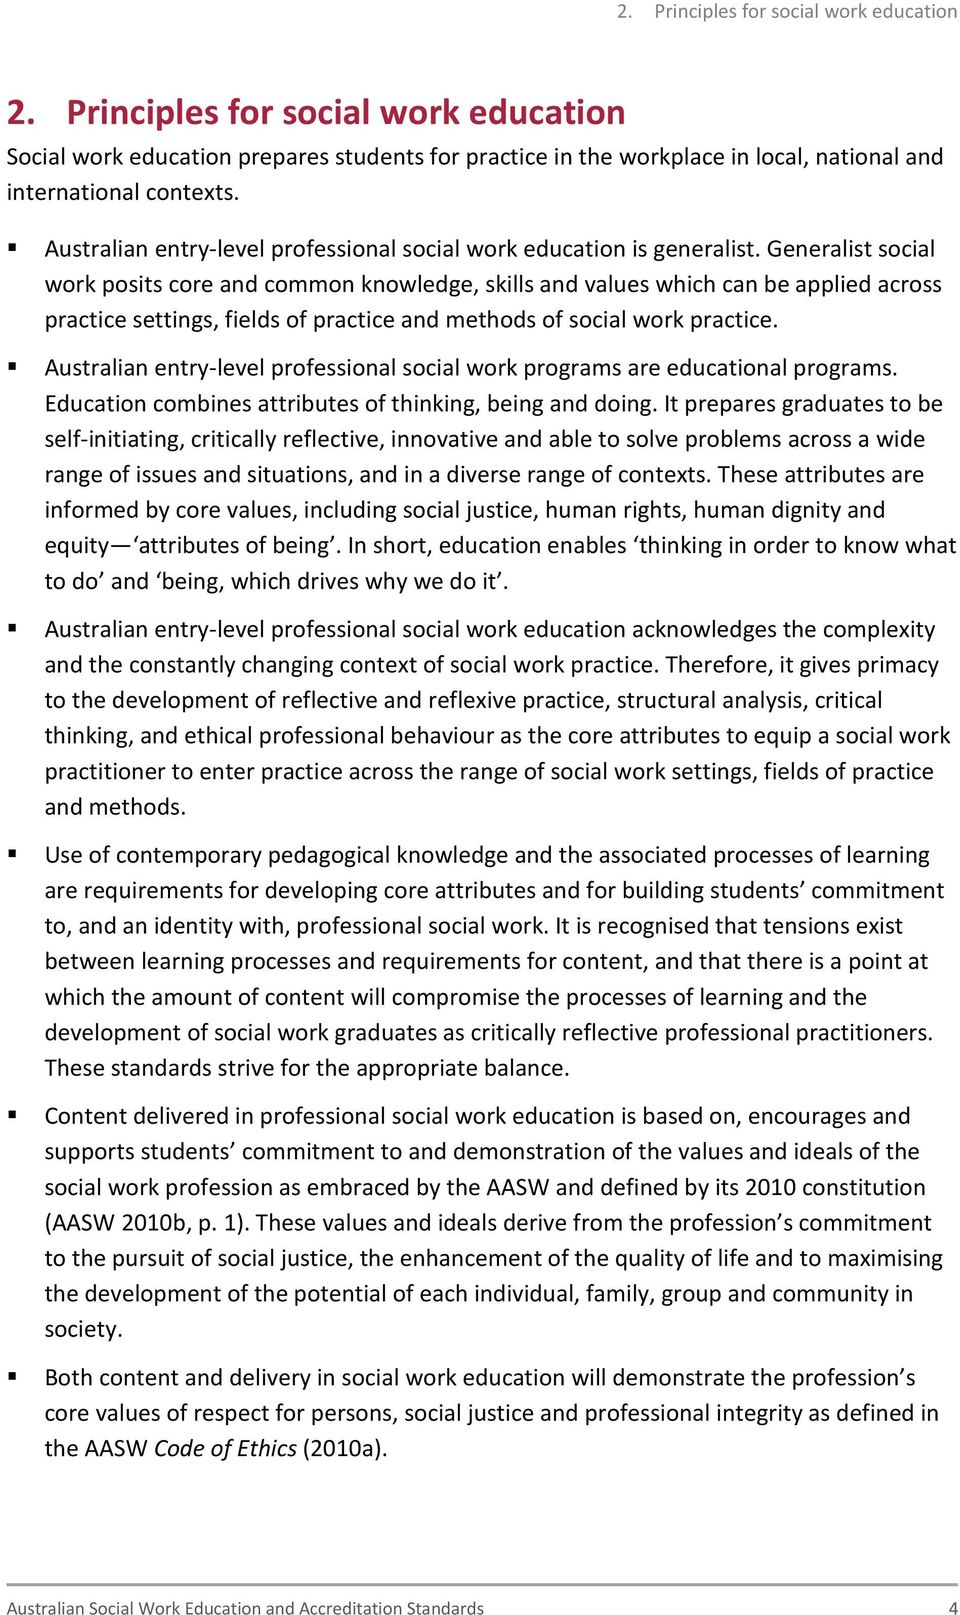 Generalist social work posits core and common knowledge, skills and values which can be applied across practice settings, fields of practice and methods of social work practice.